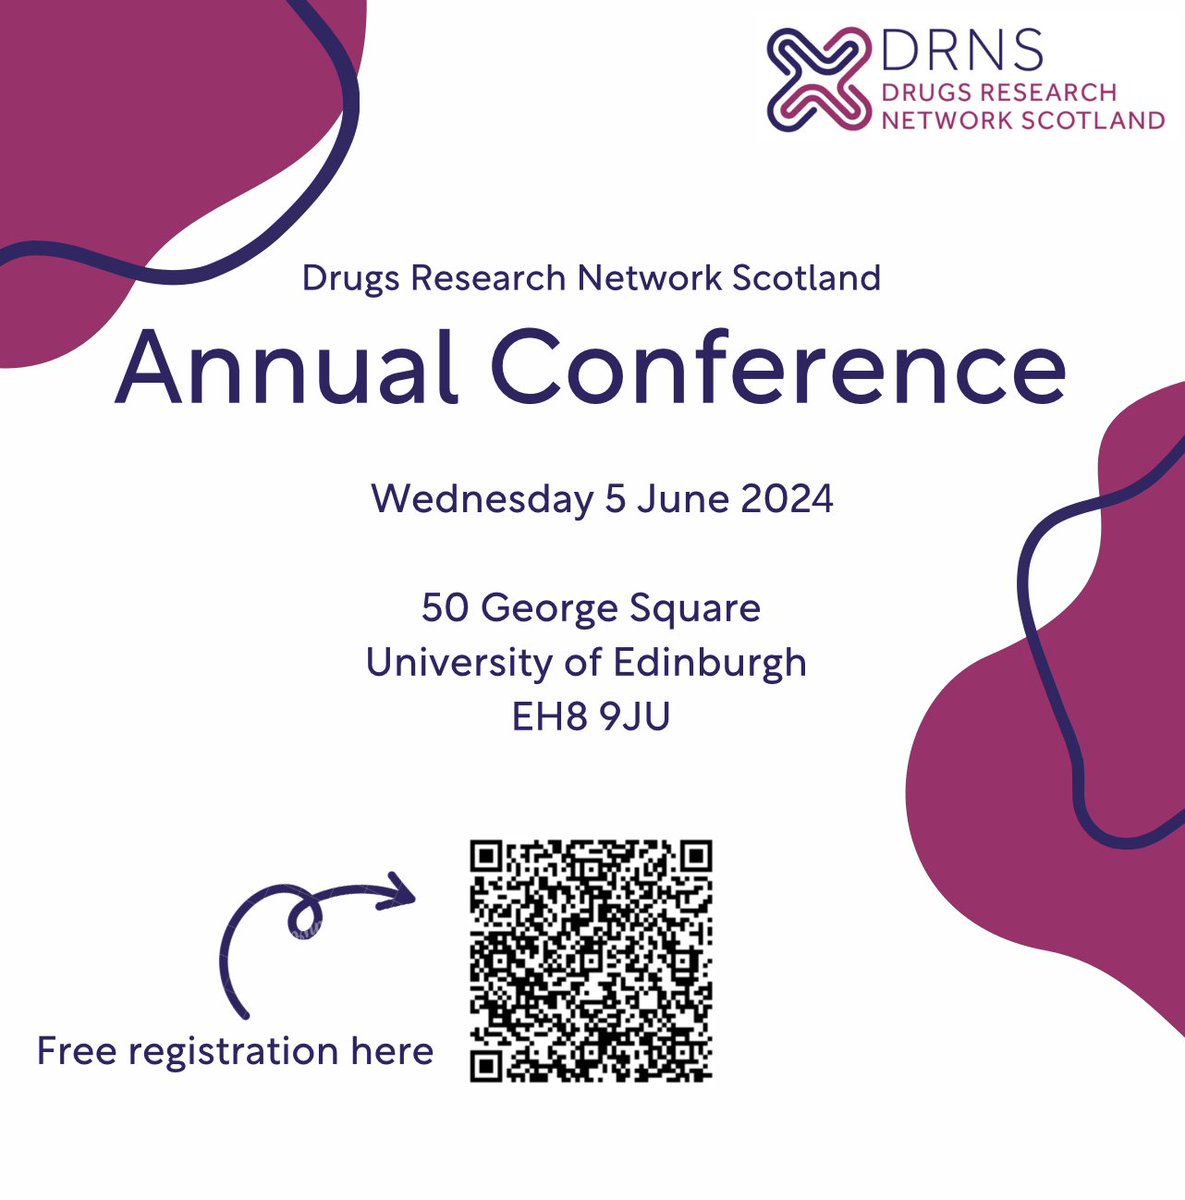 Registration for our Annual Conference is now open! 📅 Wednesday 5 June 2024 📍 50 George Square, University of Edinburgh Scan the QR code or register at the link below! eventbrite.com/e/drugs-resear…